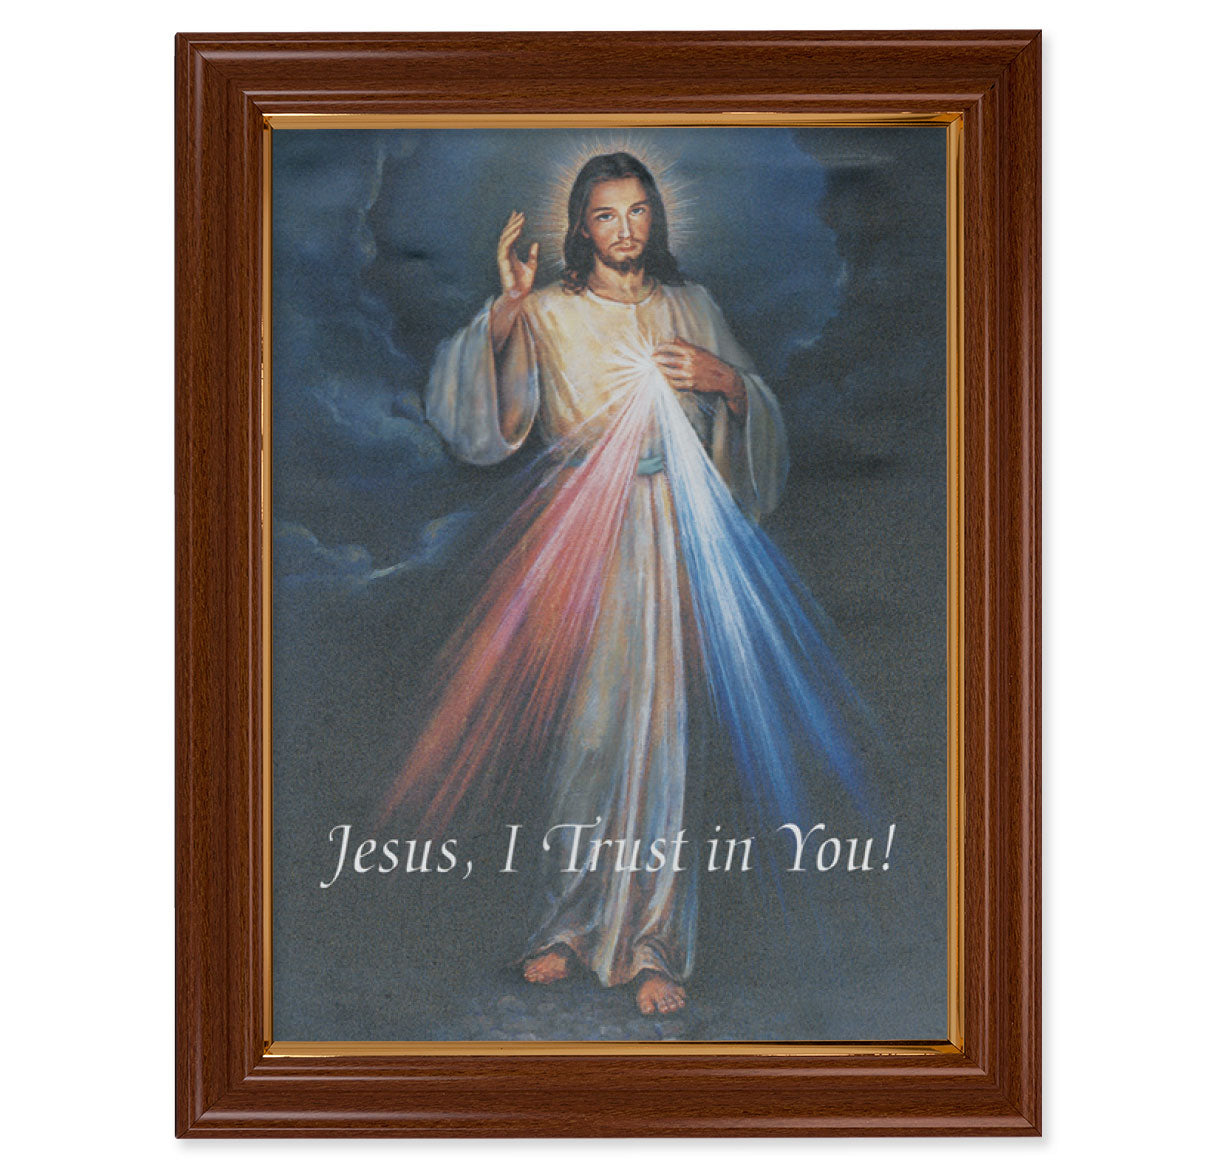 Divine Mercy Picture Framed Canvas Wall Art Decor Large, Traditional Dark Walnut Finished Frame with Thin Gold Lip